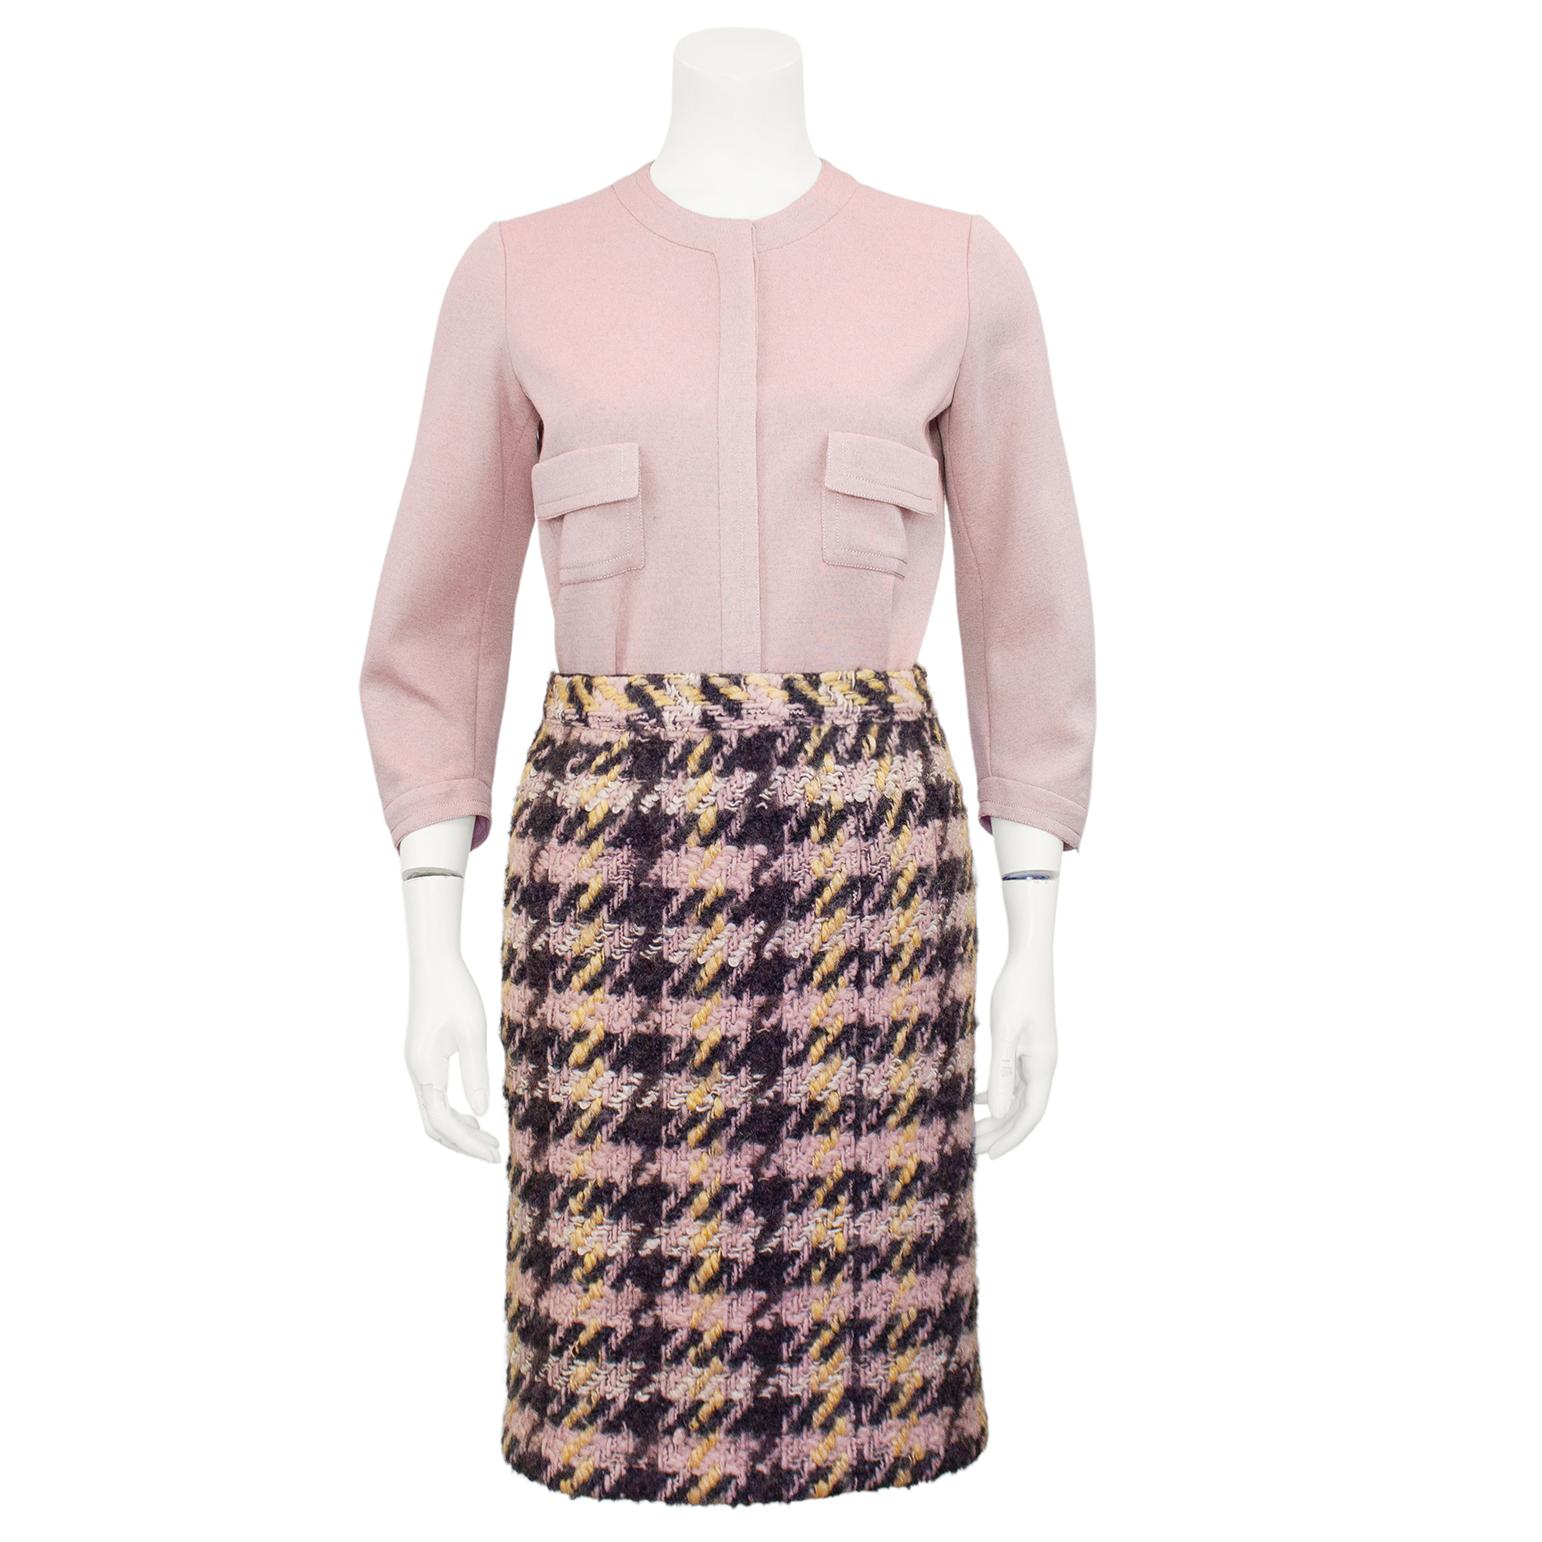 Very smart Chanel Haute Couture pink and charcoal grey houndstooth tweed ensemble from the 1960s. The 7/8 length jacket features pink and black buttons with gold tone metal lions head centre details and bracelet length sleeves. Thick cotton jersey,